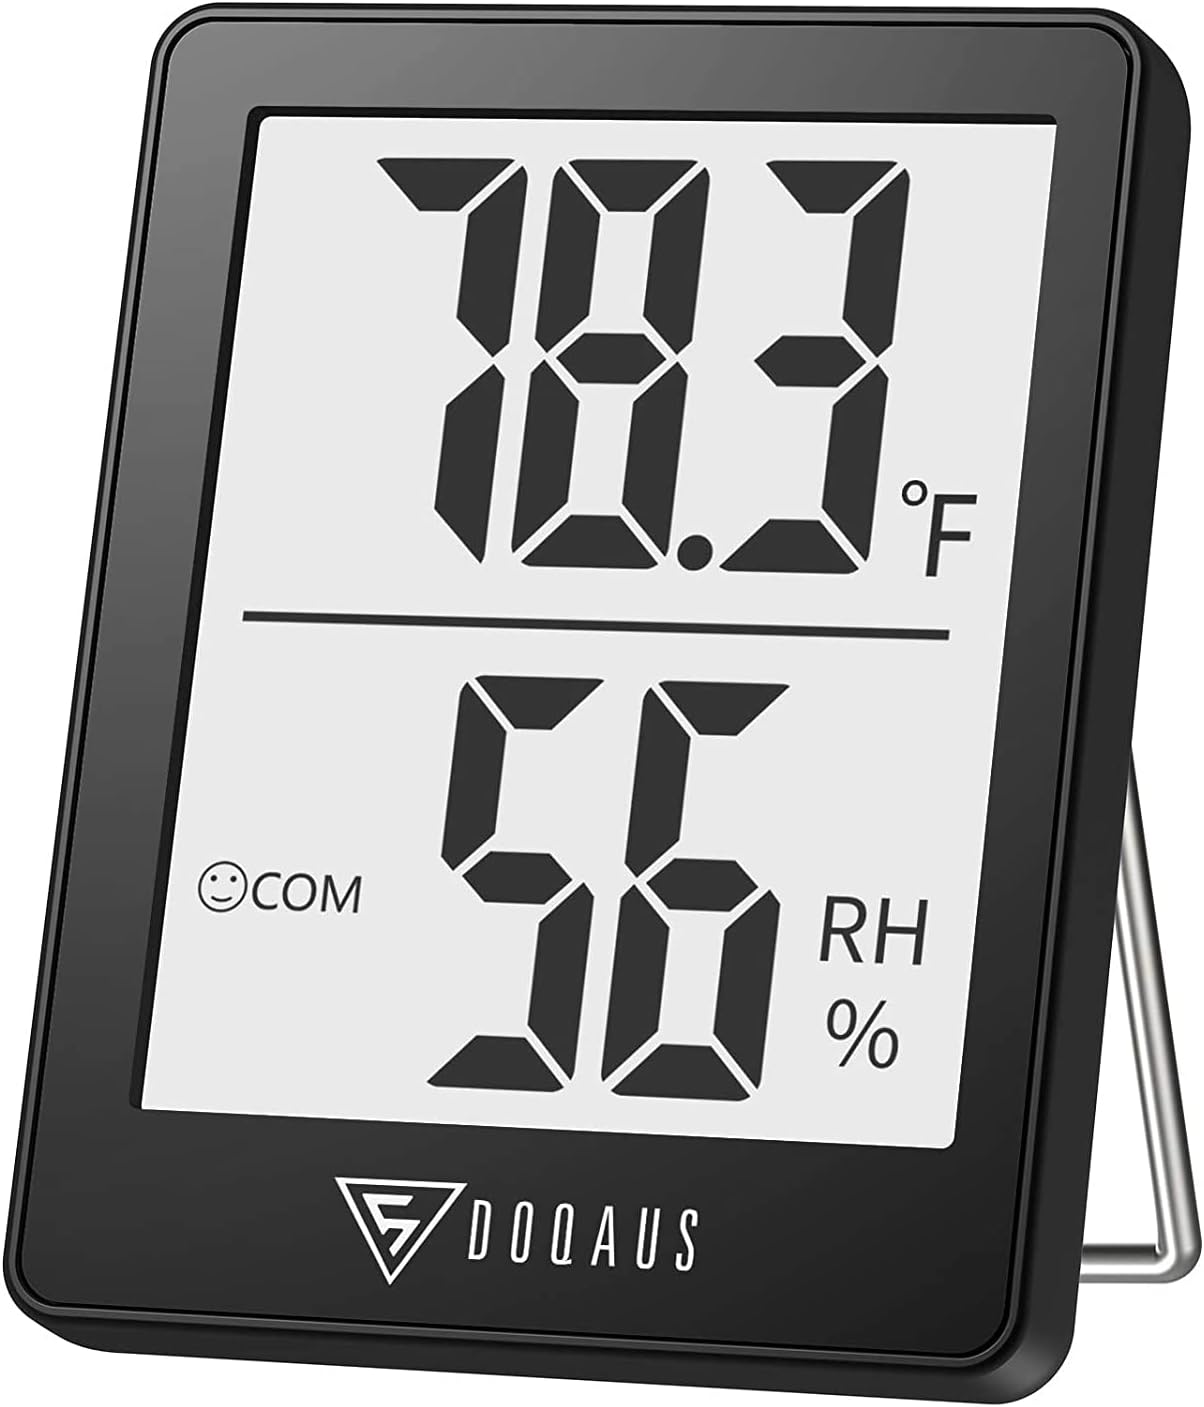 DOQAUS Digital Hygrometer Indoor Thermometer Humidity [...]